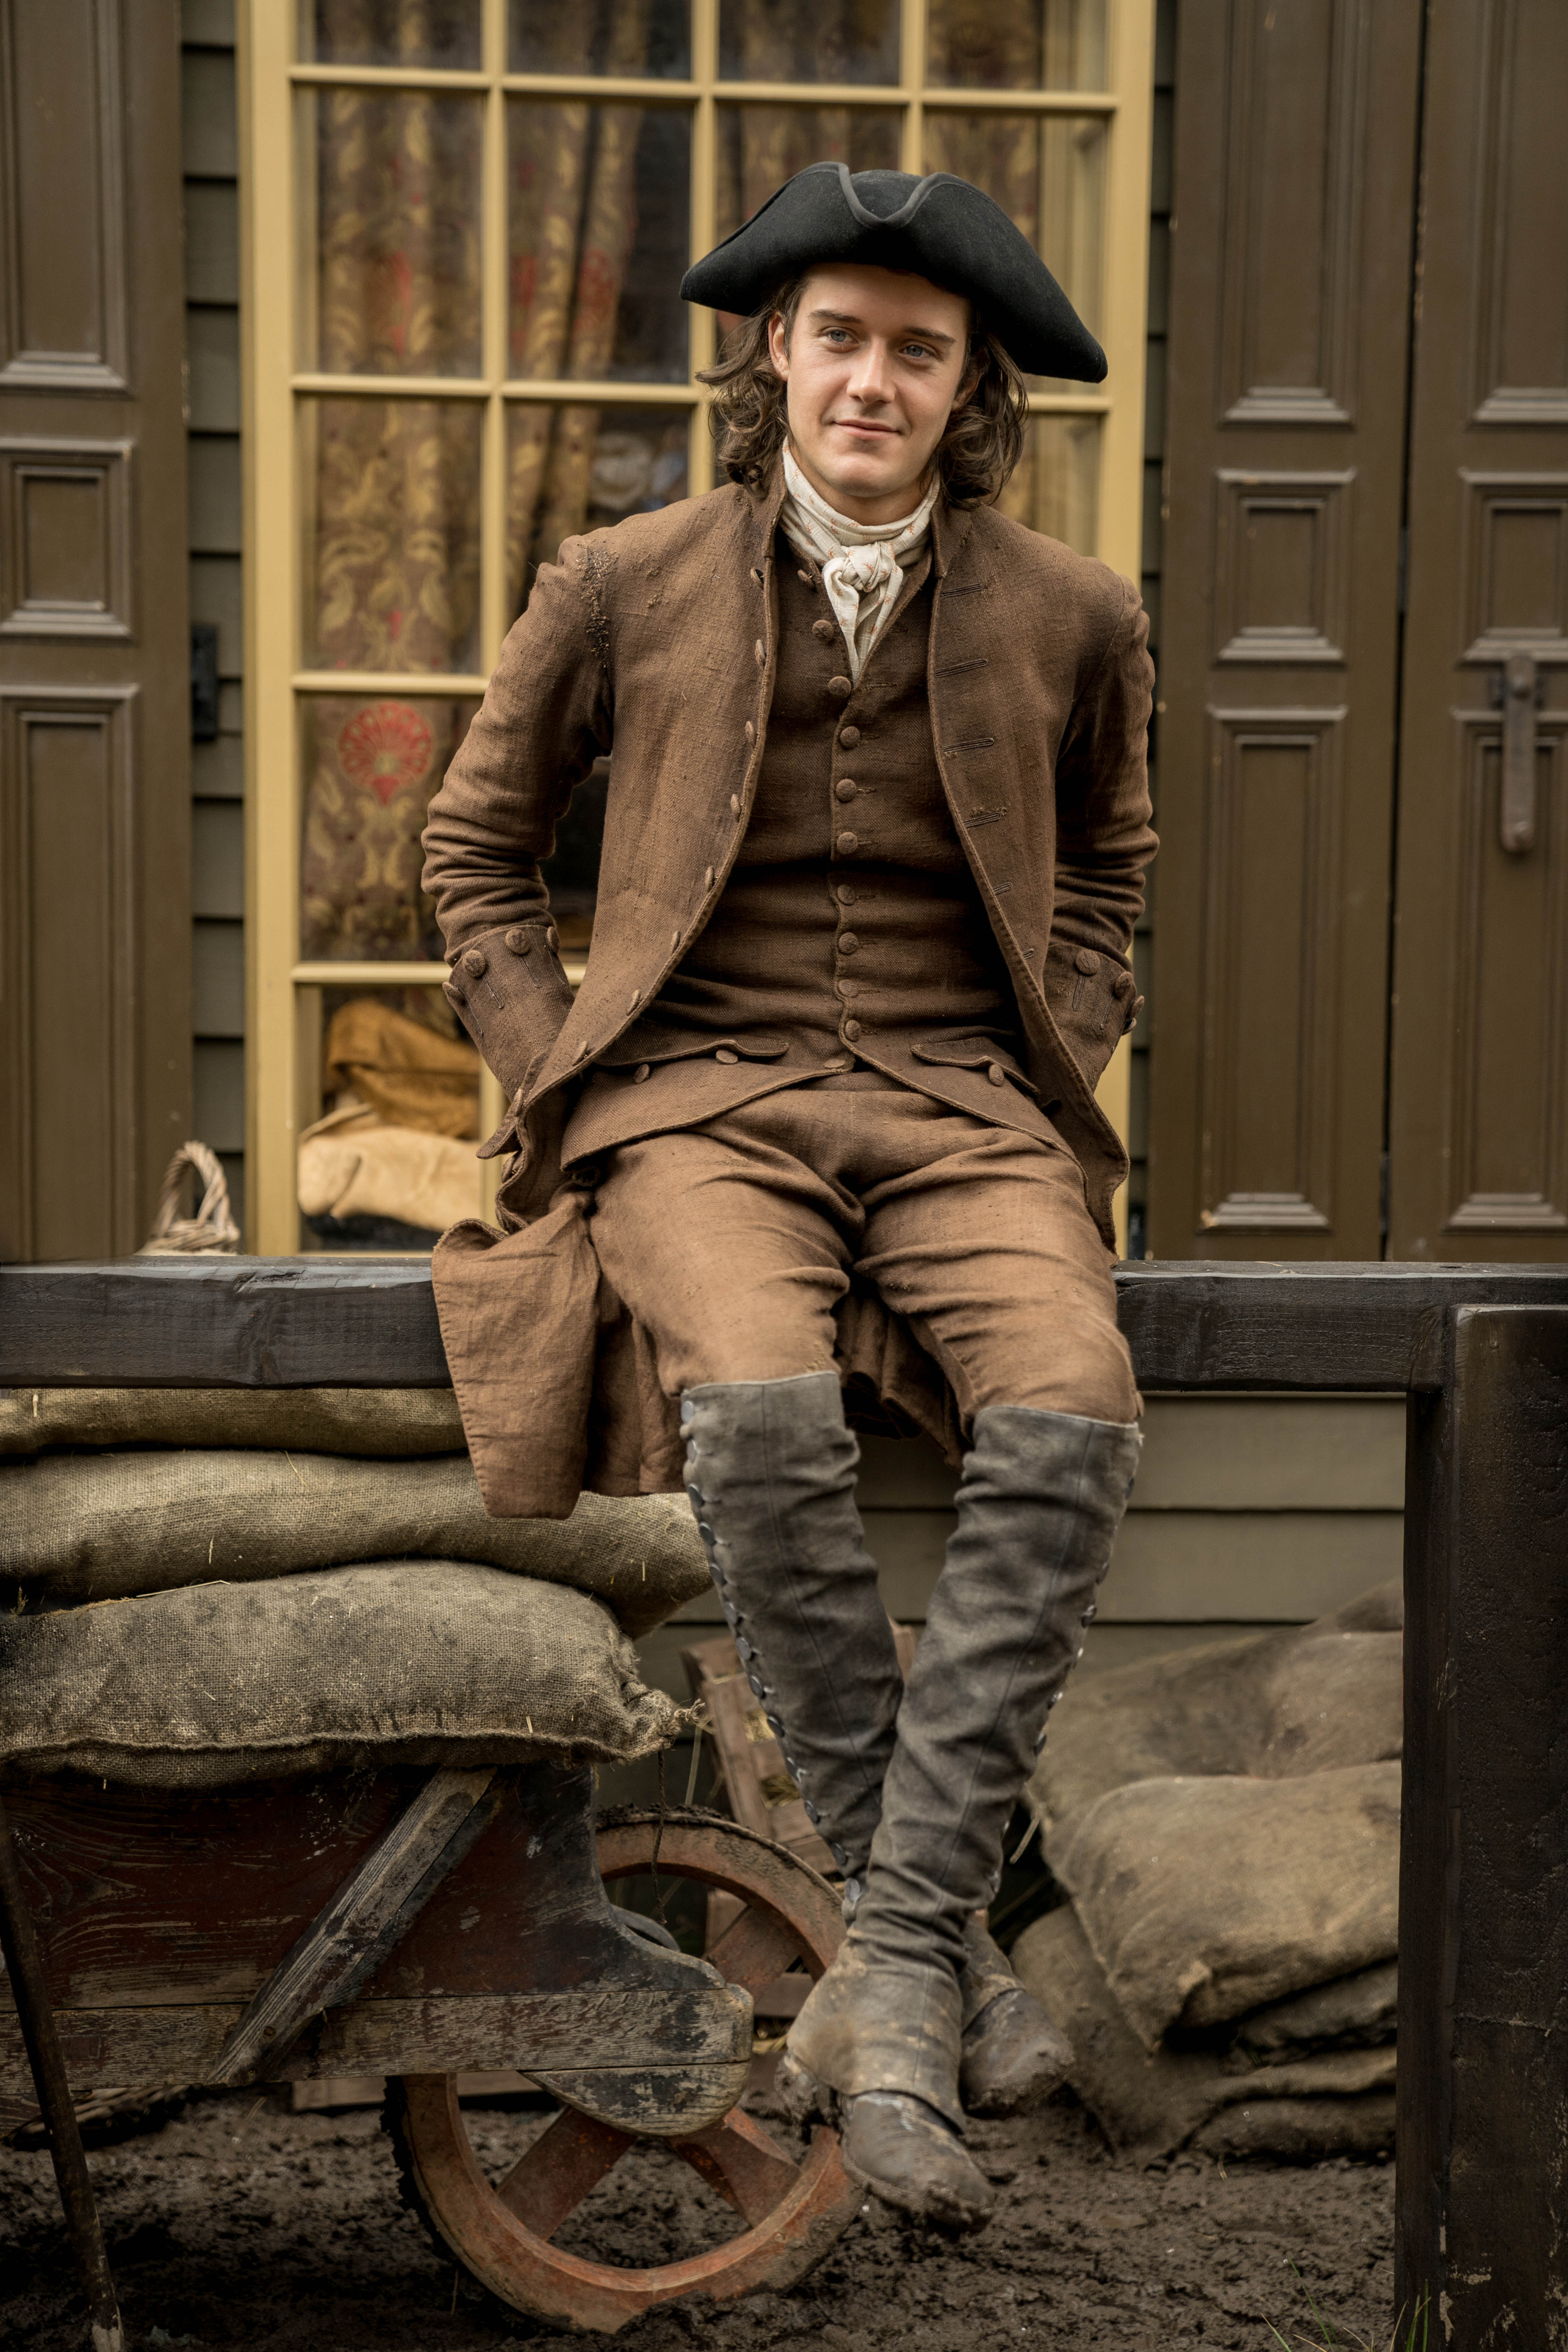 outlander-season-4-first-look-picture-outlander-2014-tv-series-photo